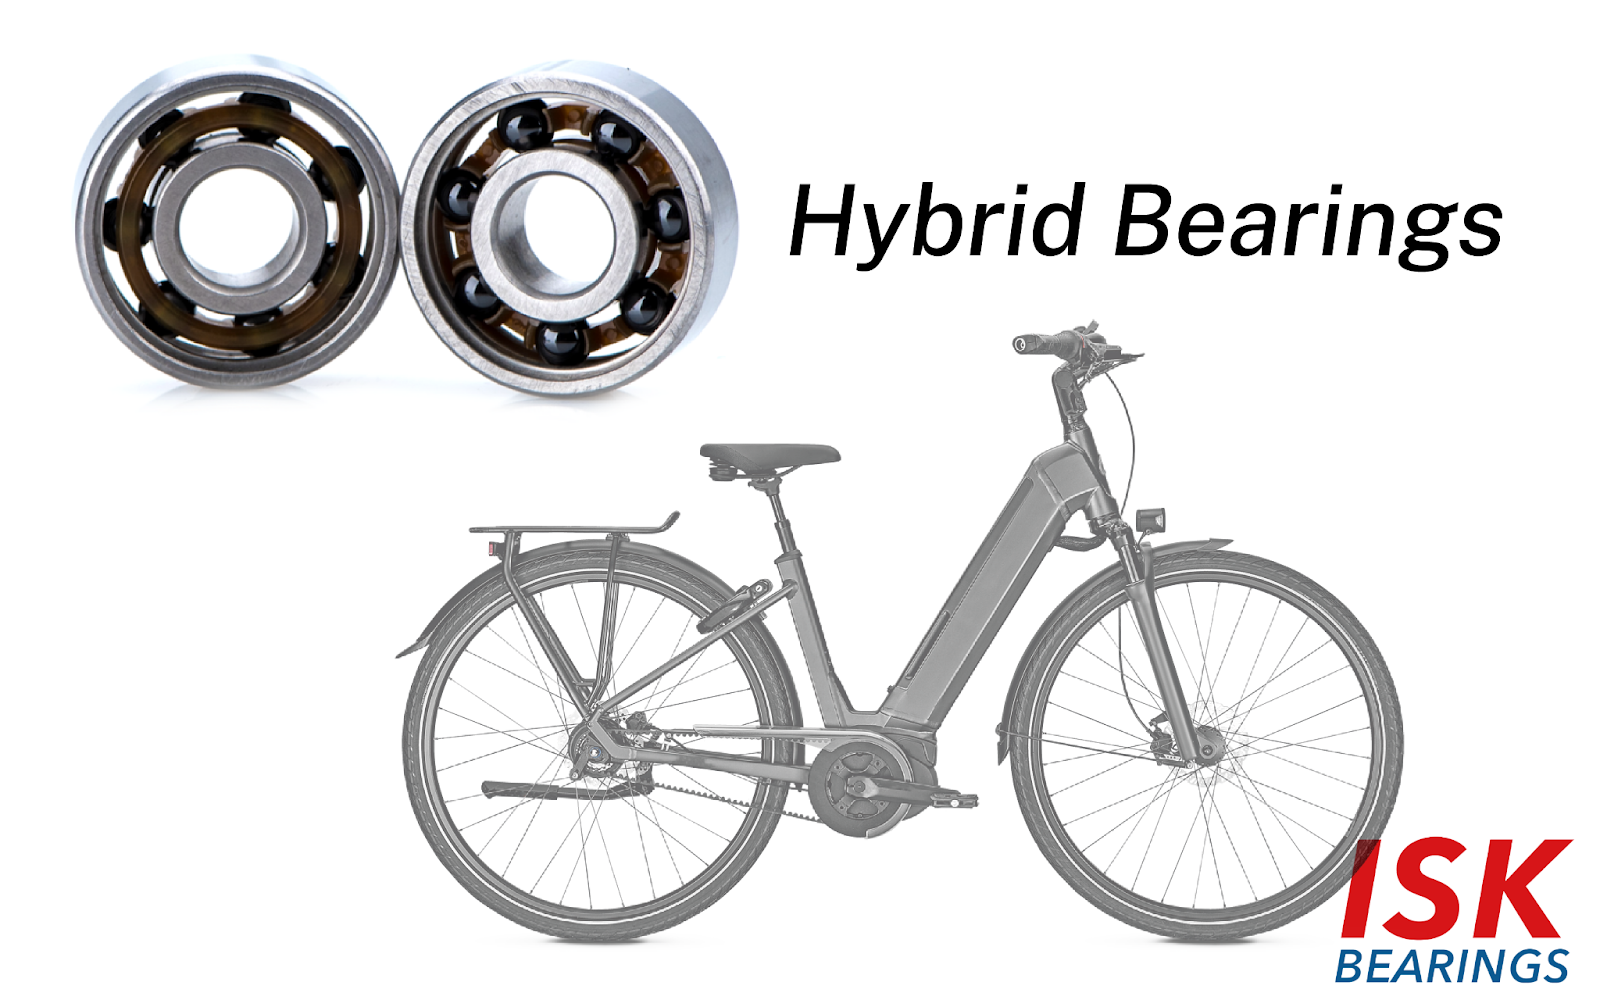 Does the Material of Bicycle Bearings Affect Performance?